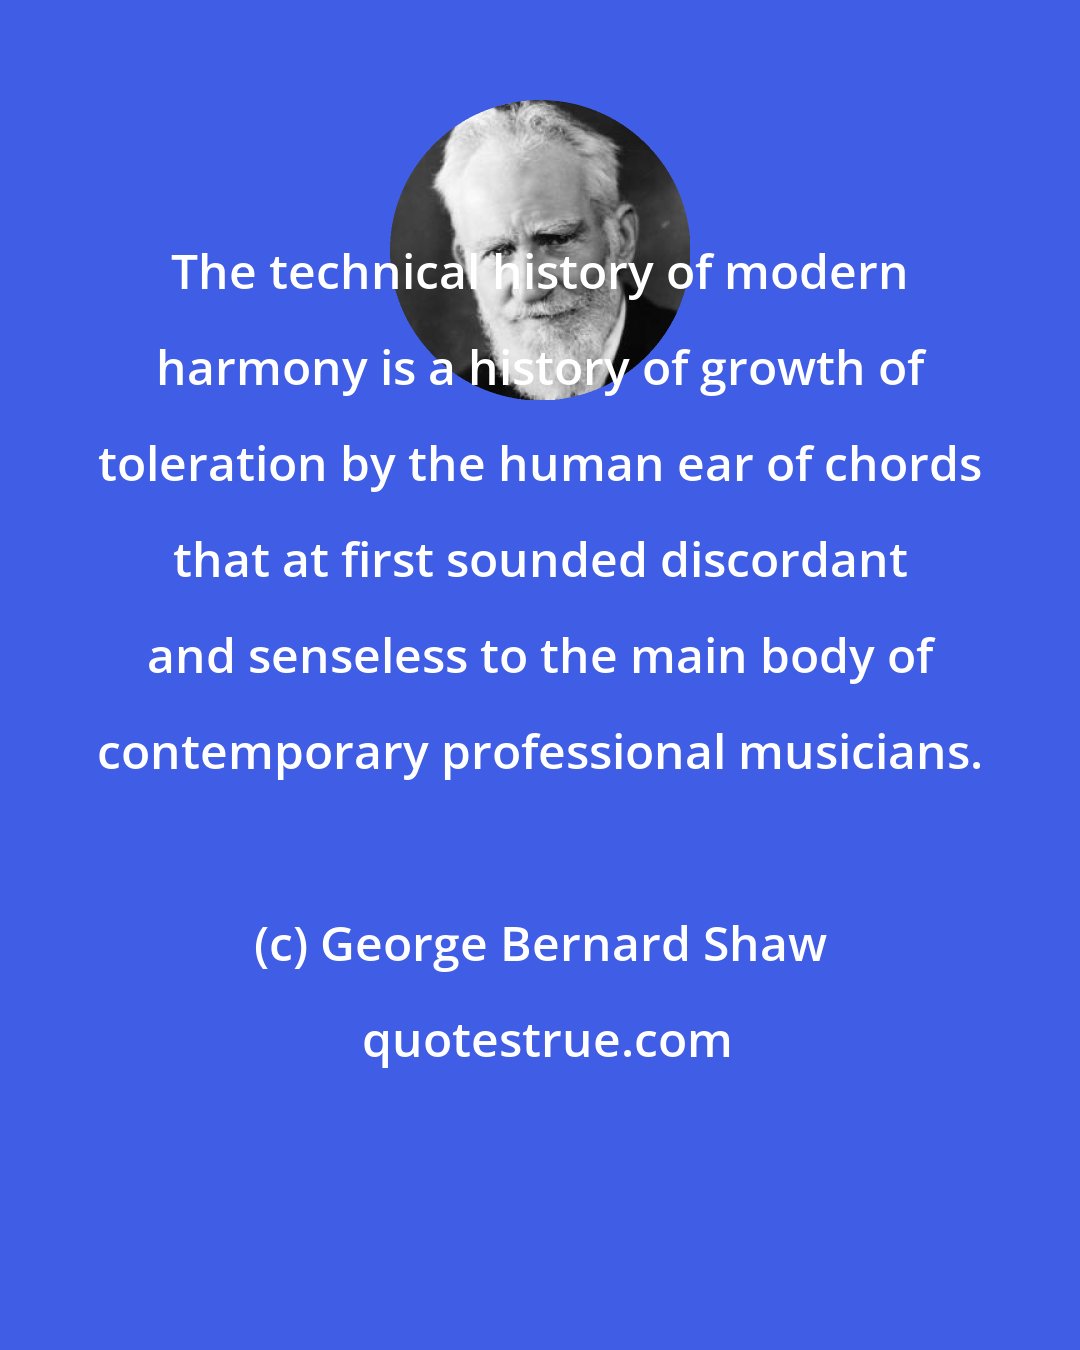 George Bernard Shaw: The technical history of modern harmony is a history of growth of toleration by the human ear of chords that at first sounded discordant and senseless to the main body of contemporary professional musicians.